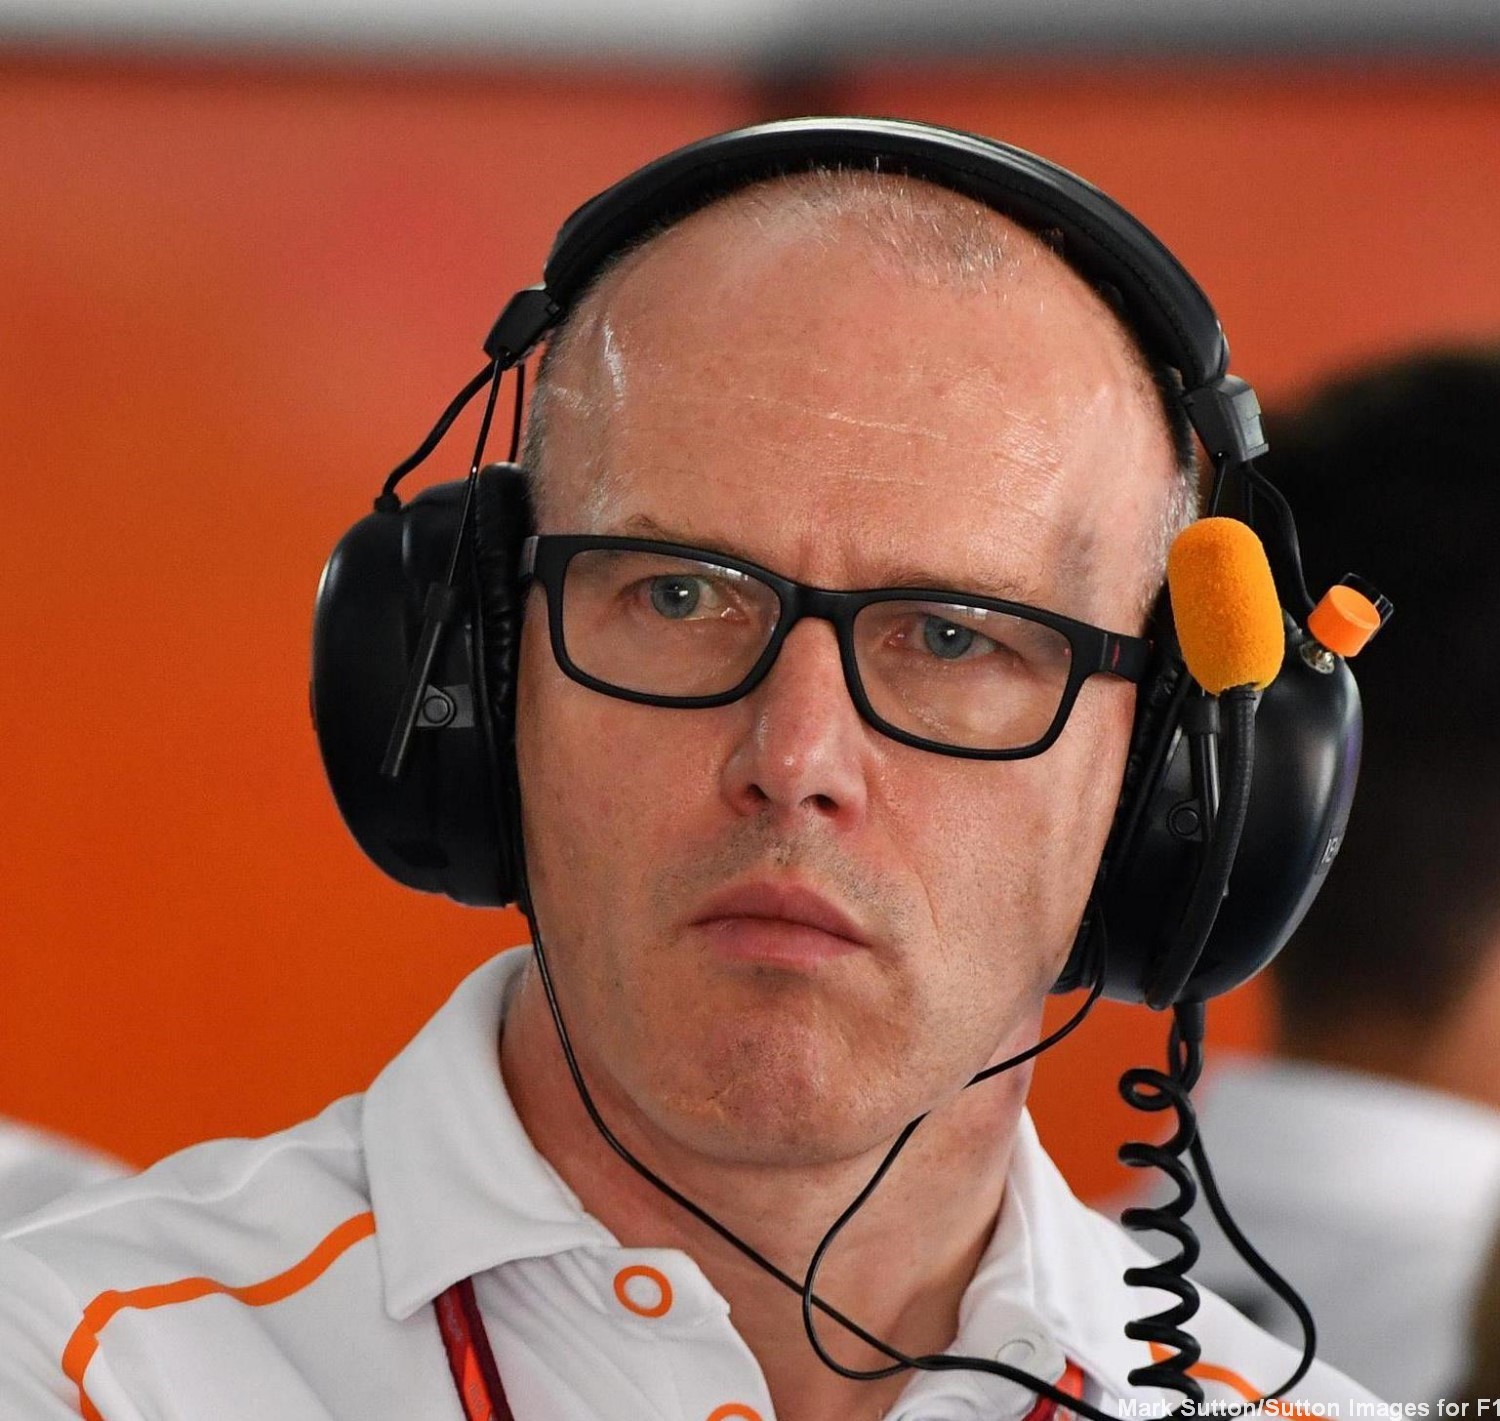 Simon Roberts formerly with McLaren, moves to Williams